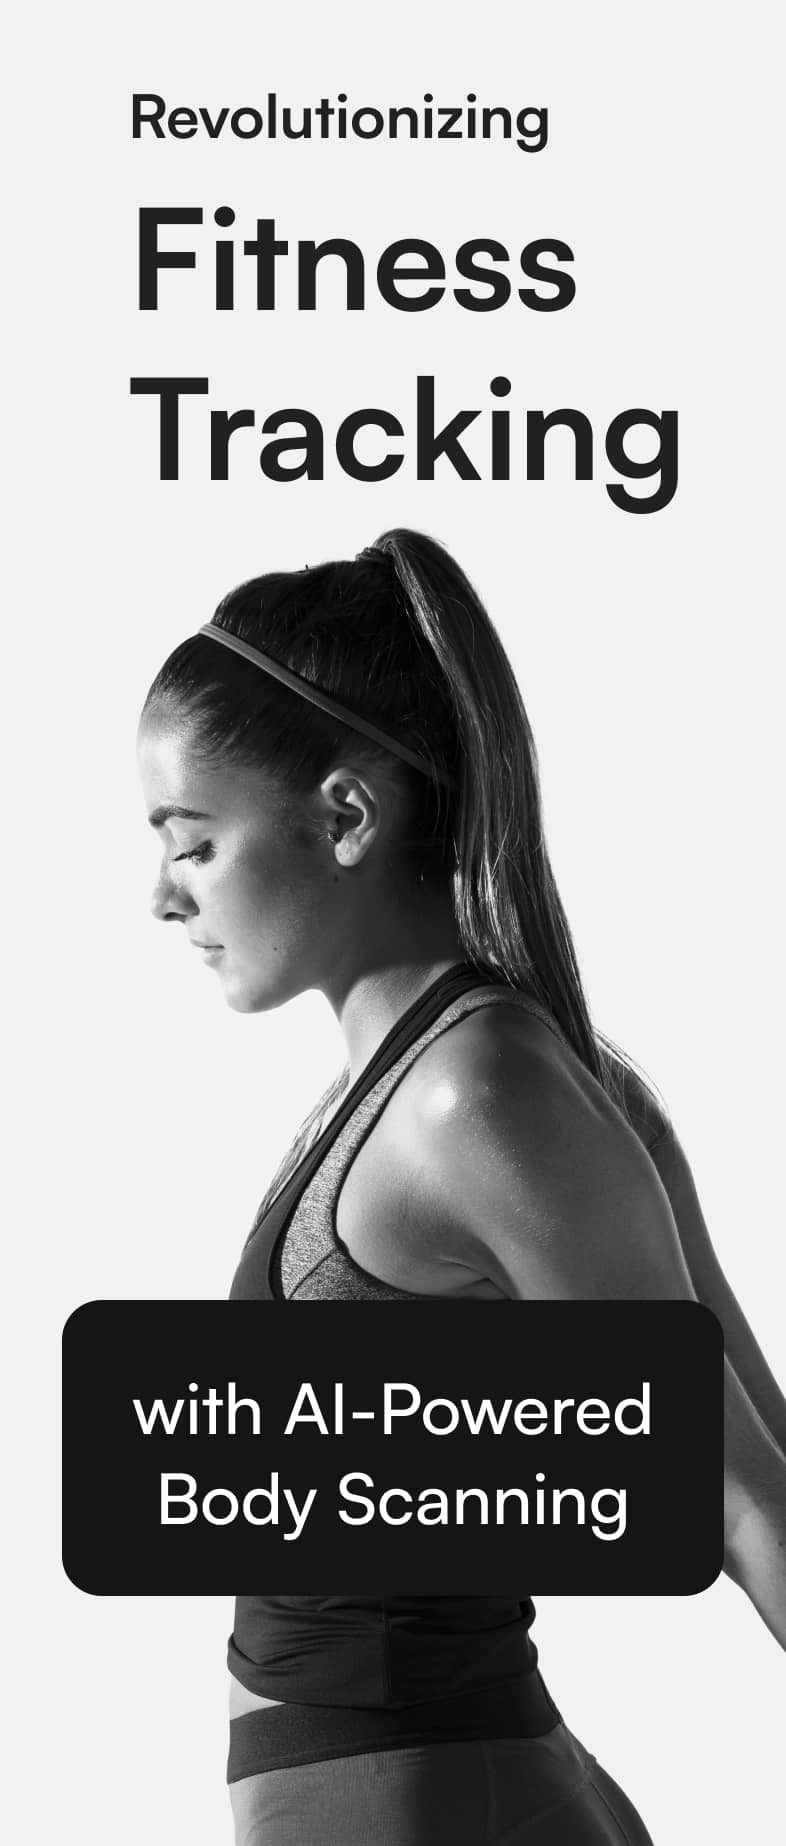 Profile view of a woman with a ponytail in workout attire, on a promotional poster about AI-powered body scanning.